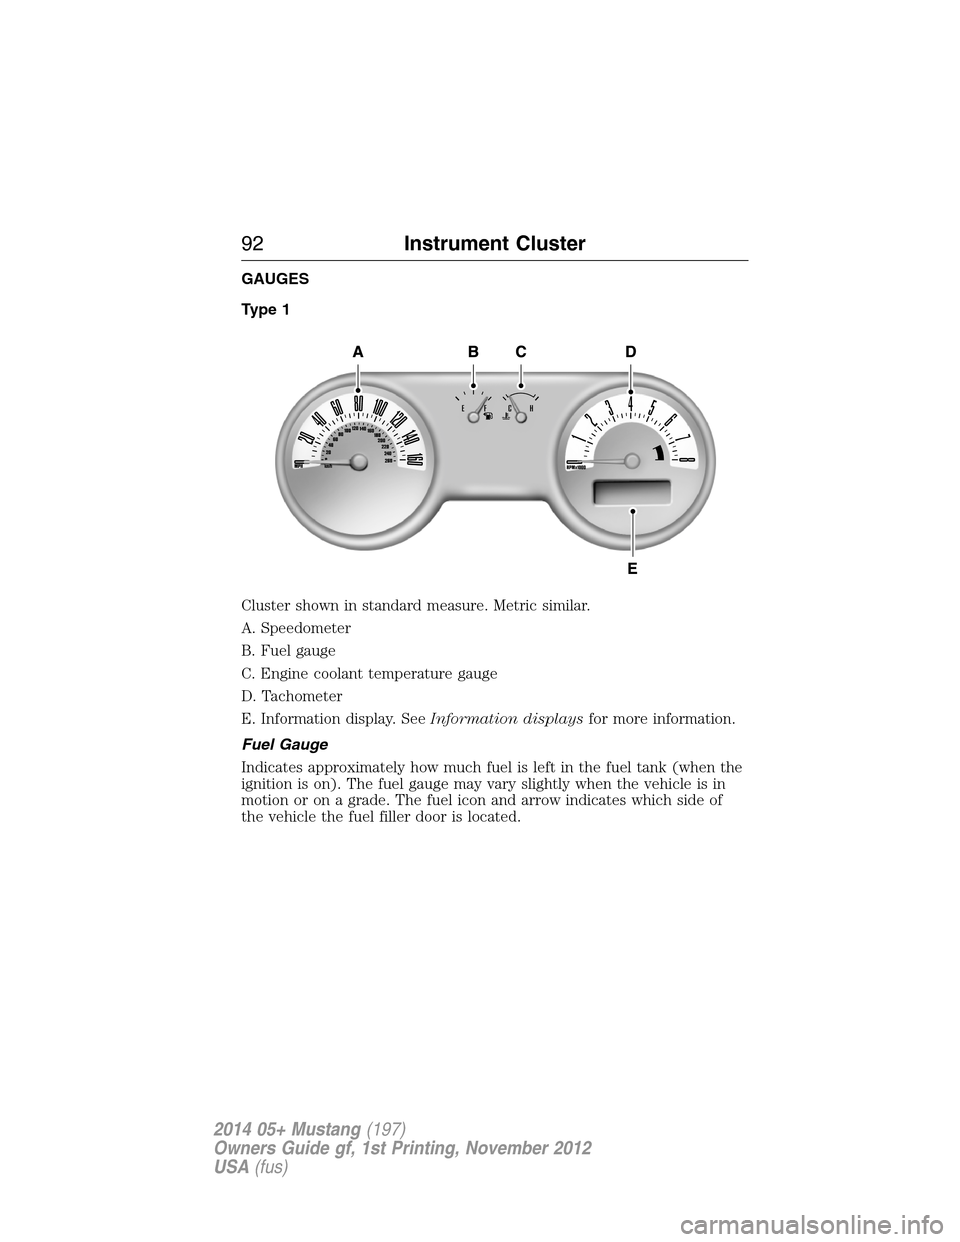 FORD MUSTANG 2014 5.G Owners Manual GAUGES
Type 1
Cluster shown in standard measure. Metric similar.
A. Speedometer
B. Fuel gauge
C. Engine coolant temperature gauge
D. Tachometer
E. Information display. SeeInformation displaysfor more 